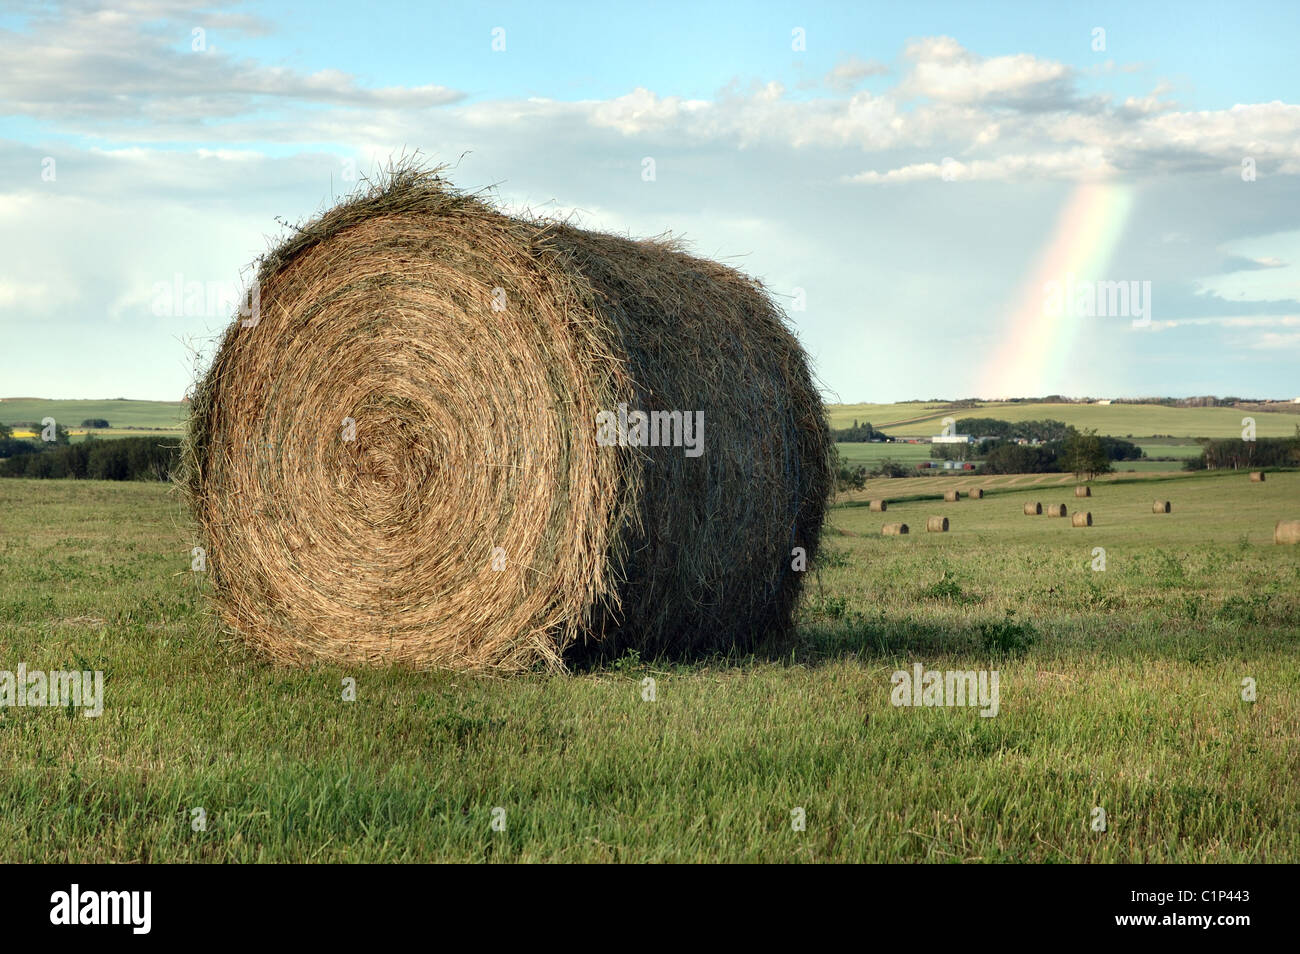 A round bale of hay sitting in a field in the country with a rainbow in the background. Stock Photo